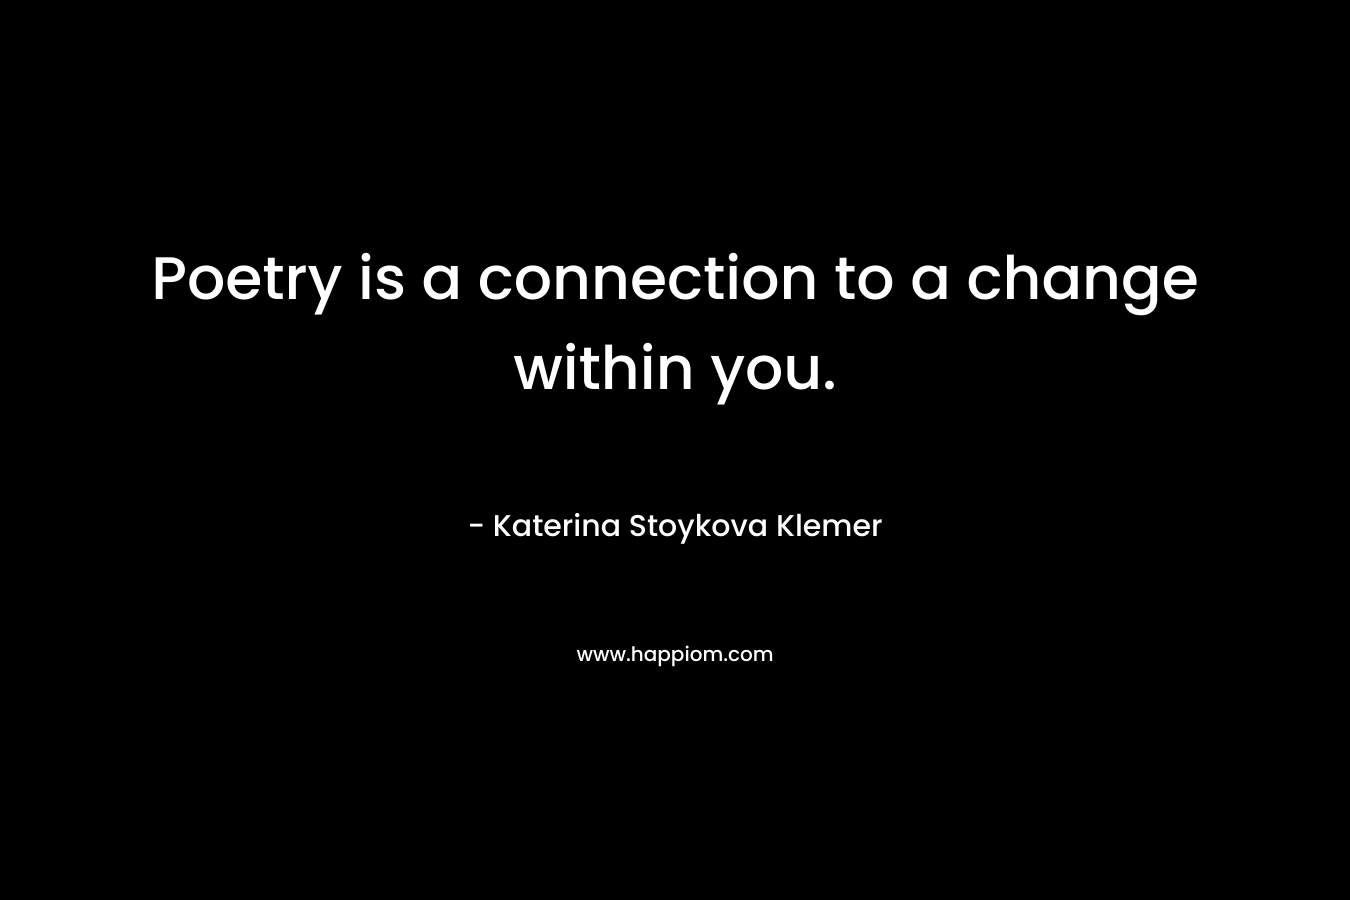 Poetry is a connection to a change within you.